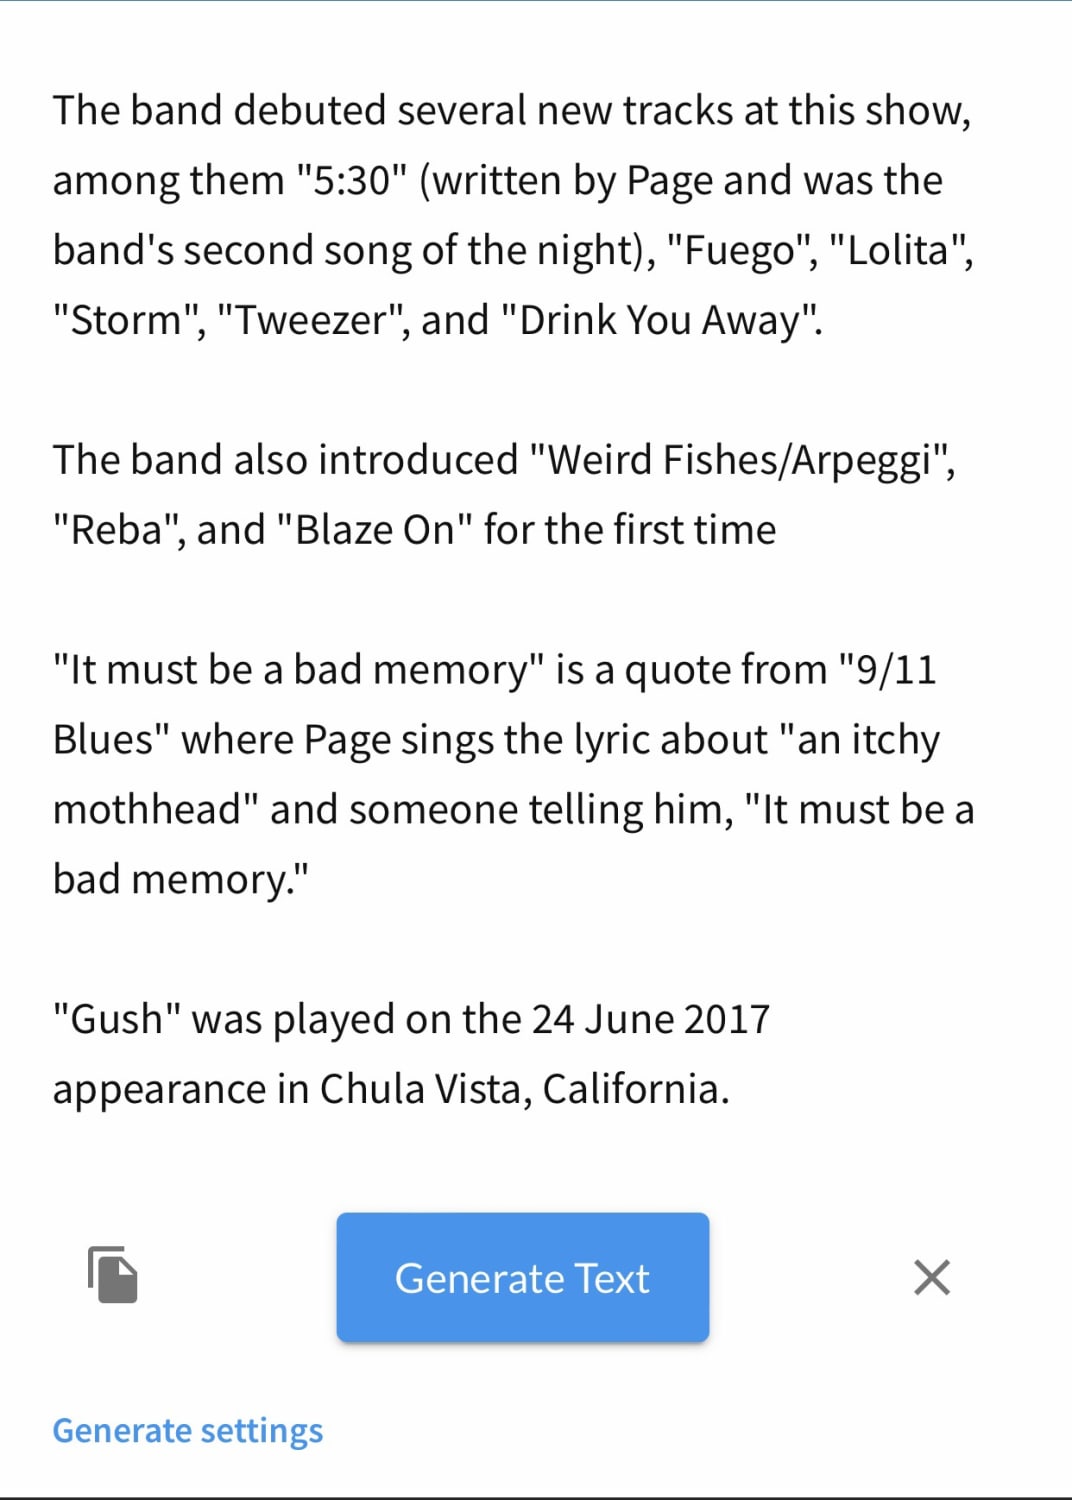 I was playing with an AI text generator and it brought up an alternate history of the band.